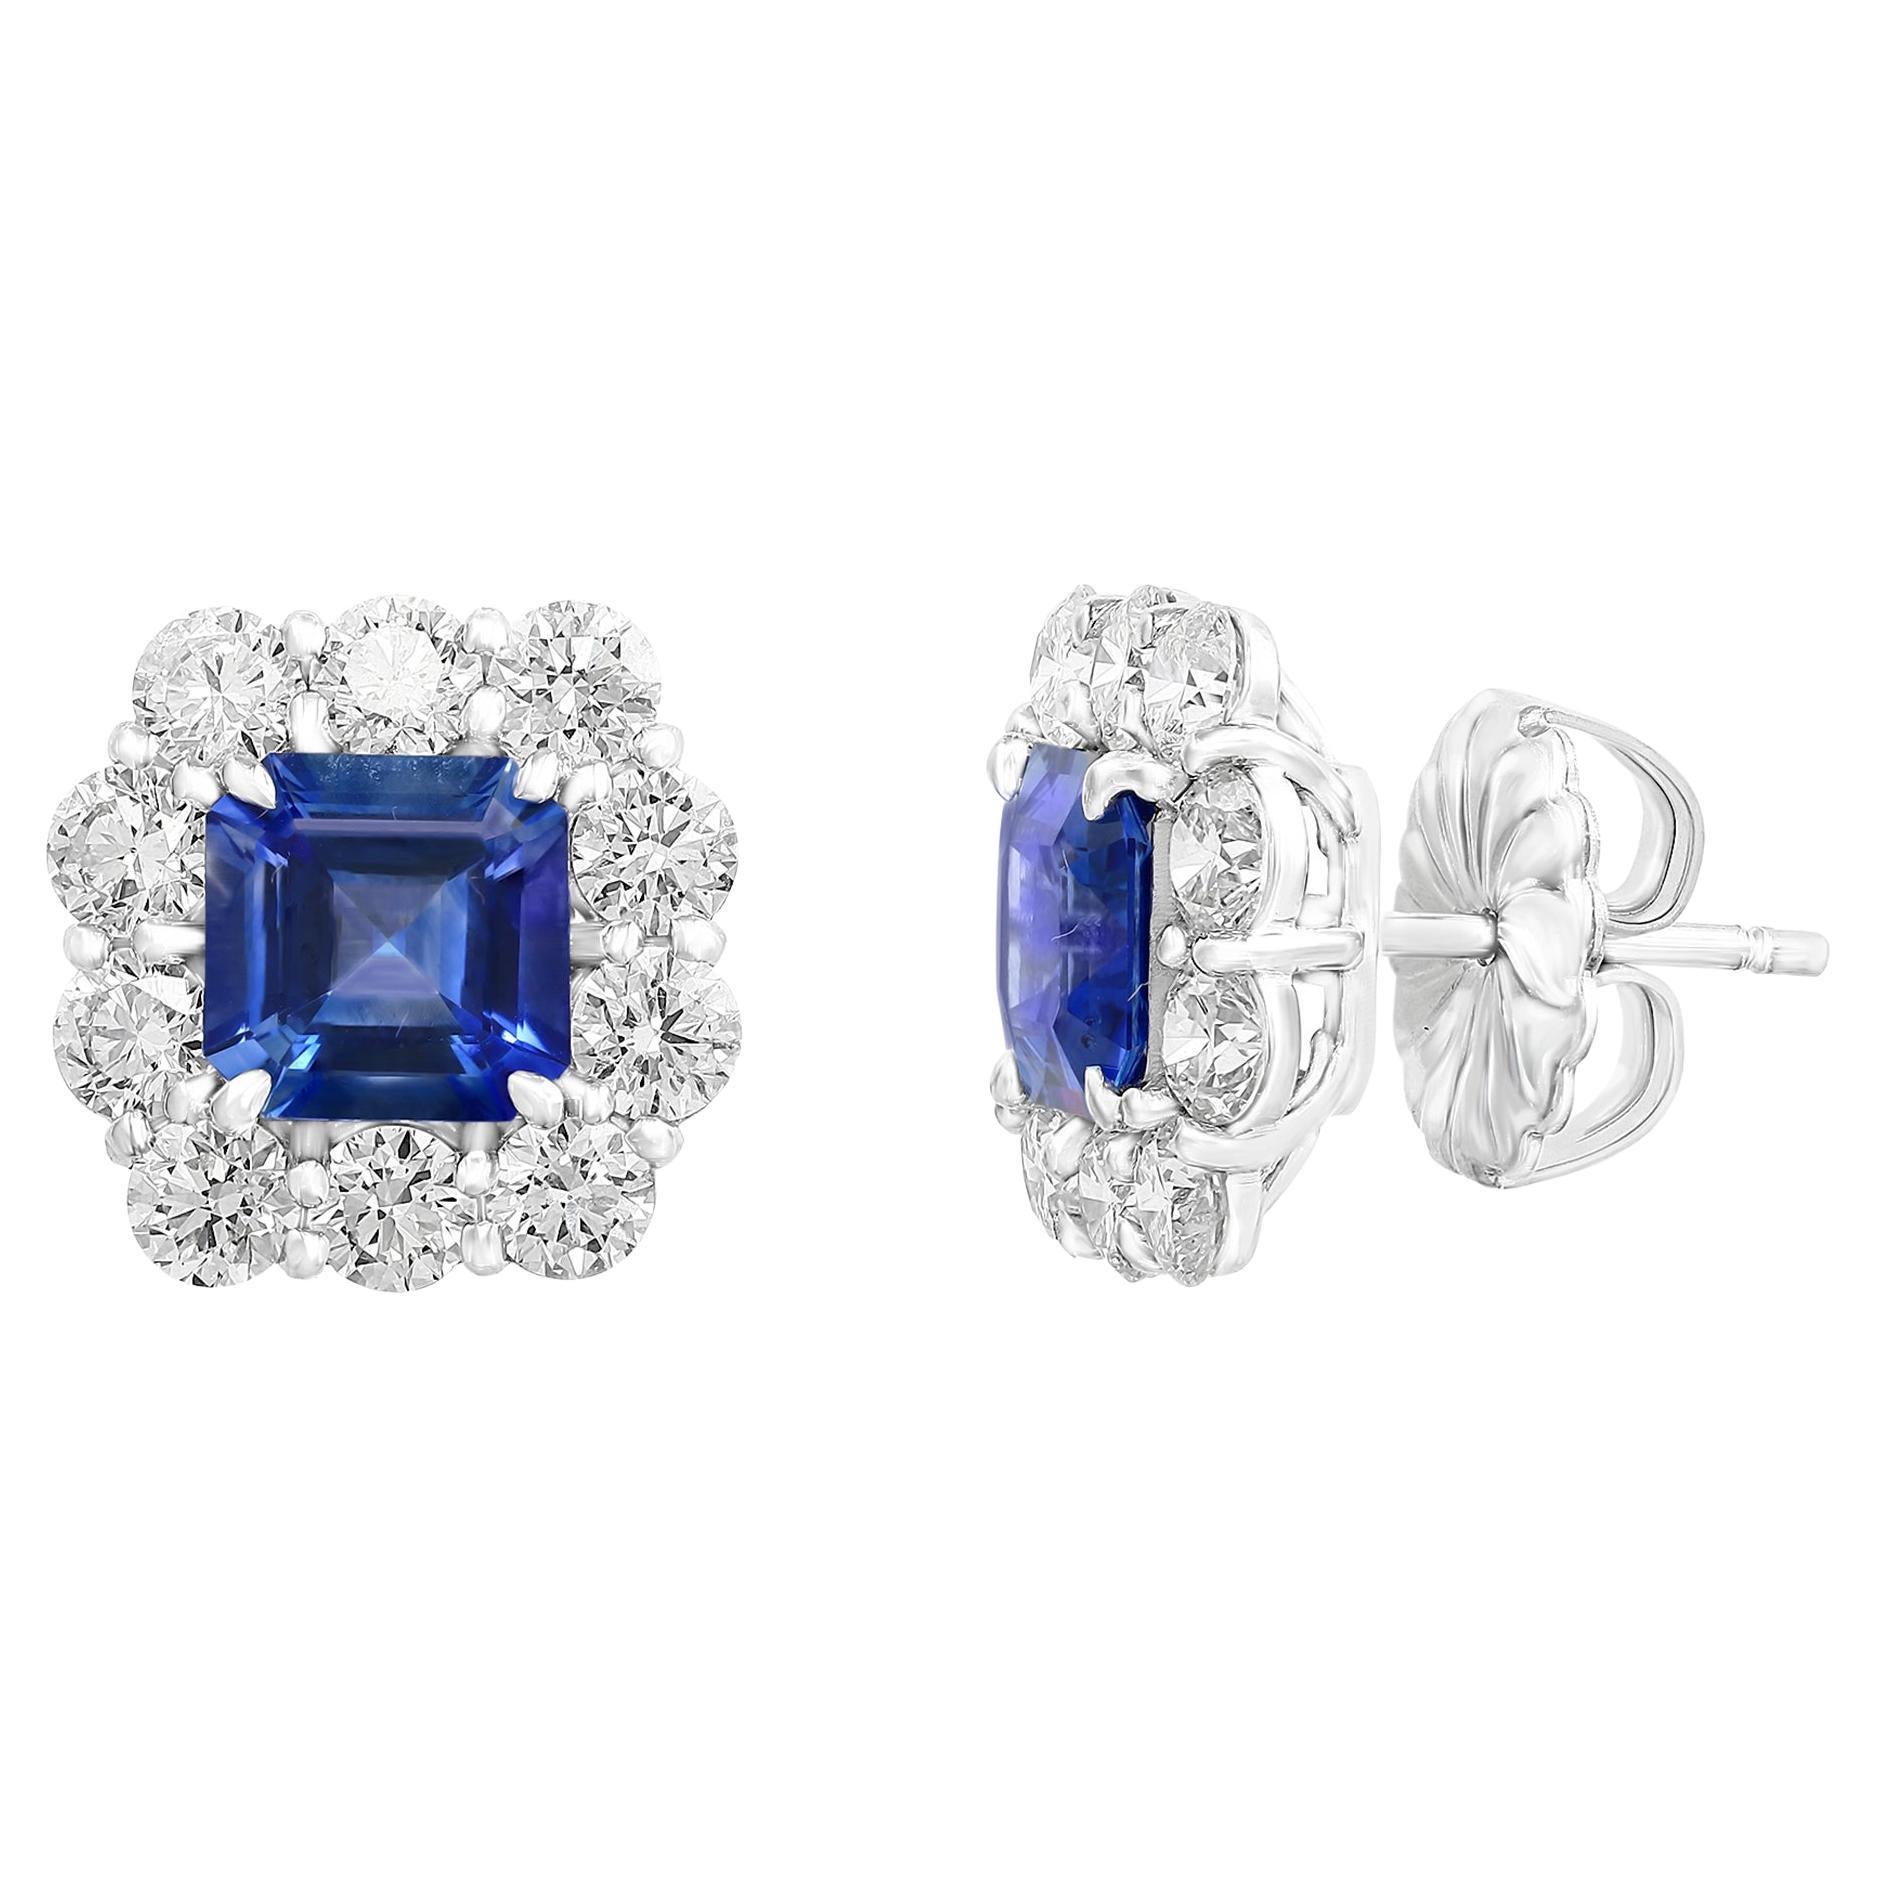 3.02 Carat Emerald Cut Blue Sapphire and Diamond Stud Earrings in 18K White Gold For Sale